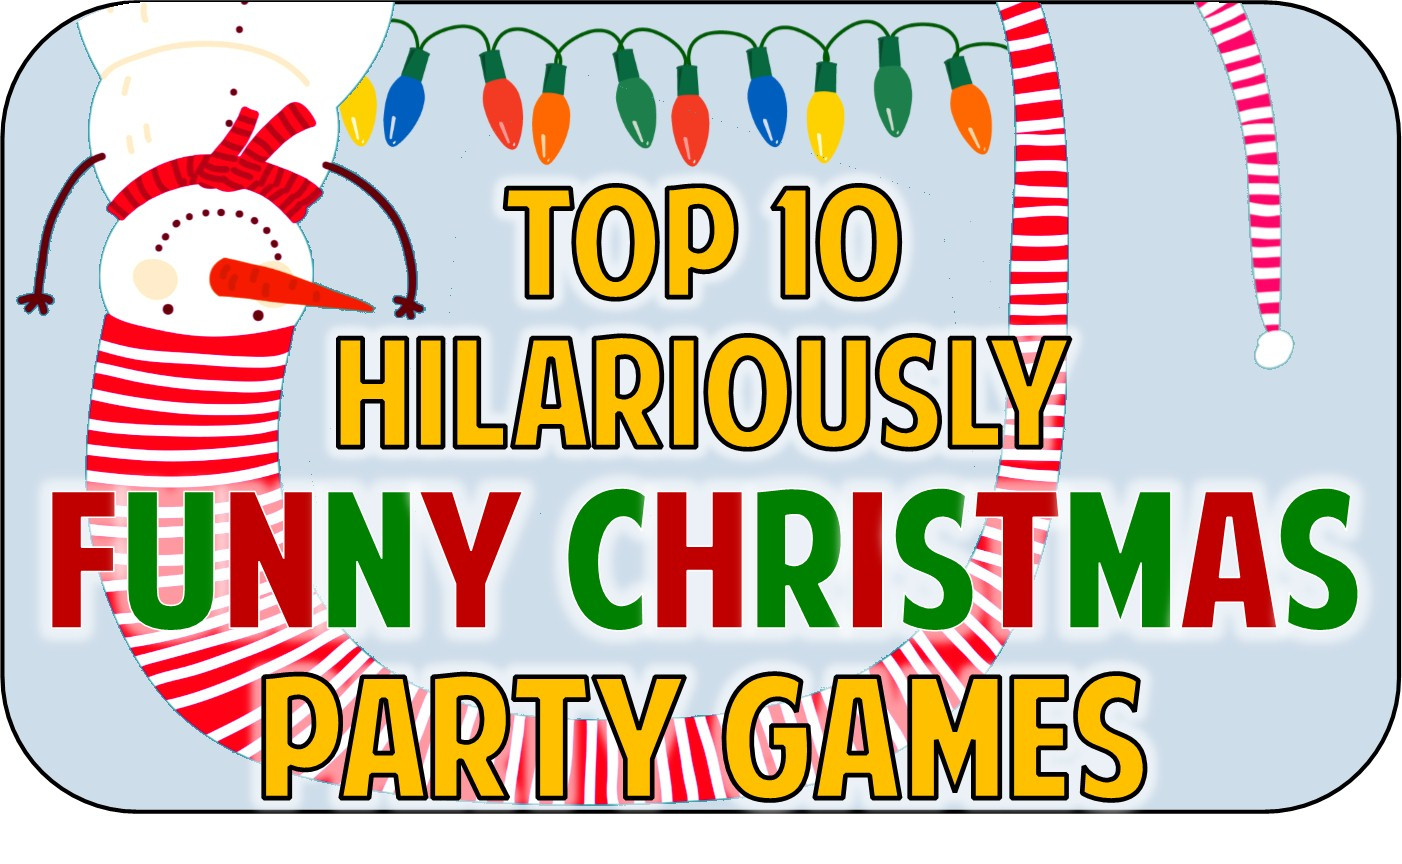 Great Christmas Party Ideas
 Top 10 Funny Christmas Party Game Ideas